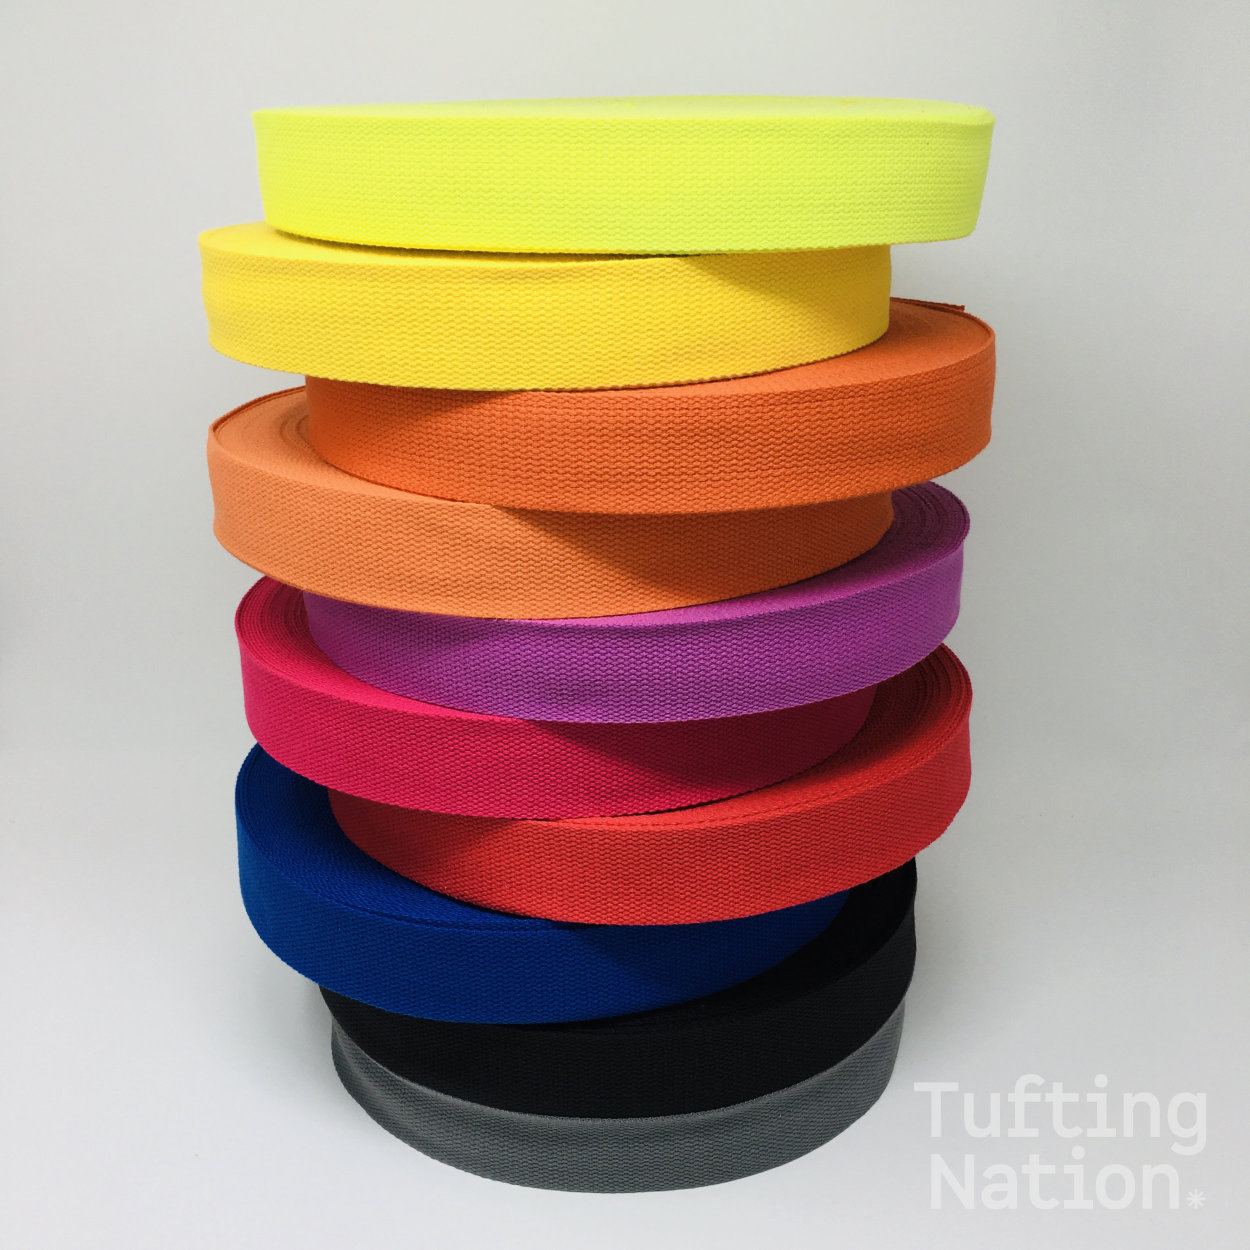 Pile of colorful binding tape for carpet finishing. 1.5 inch wide, 100% cotton twill tape at TuftingNation.